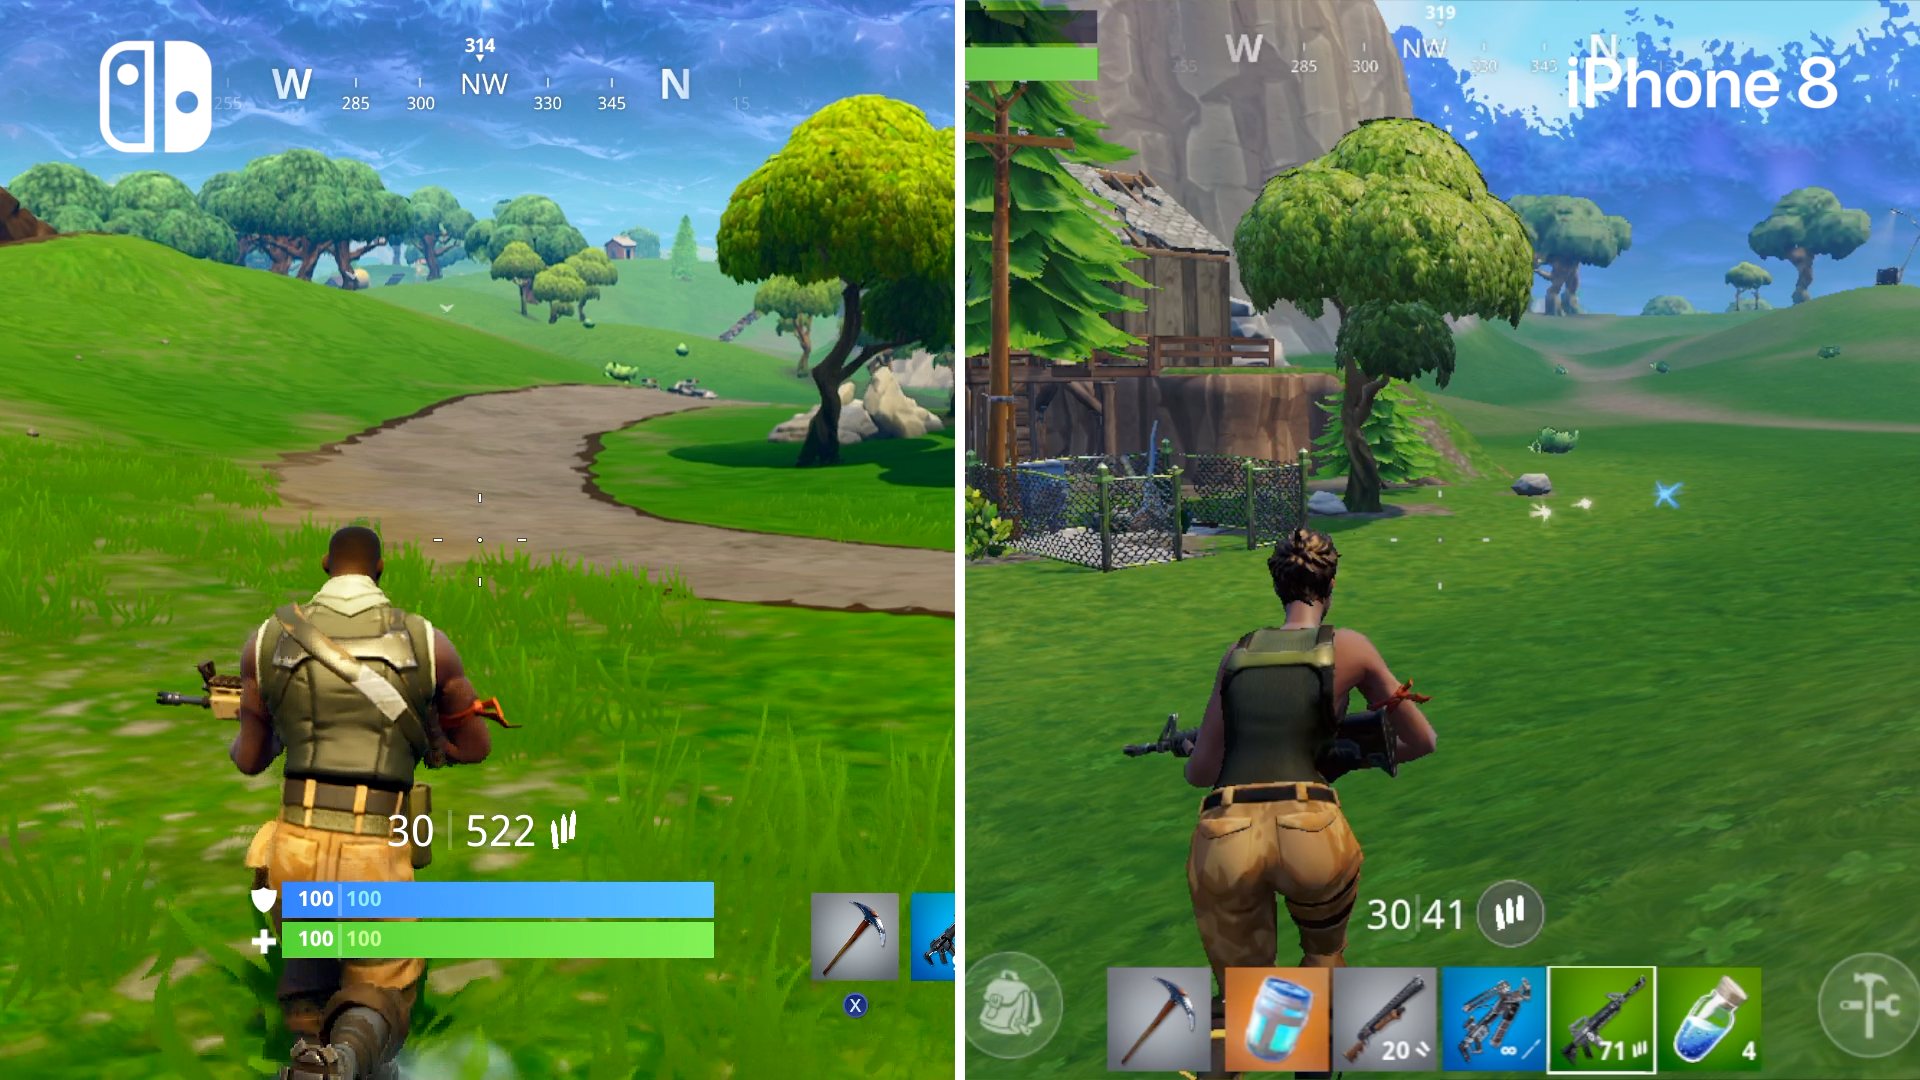 the biggest advantage switch holds over the iphone 8 comes in shadow draw distance foliage and general stability though there is still some pop in for - fortnite 2gb ram pc